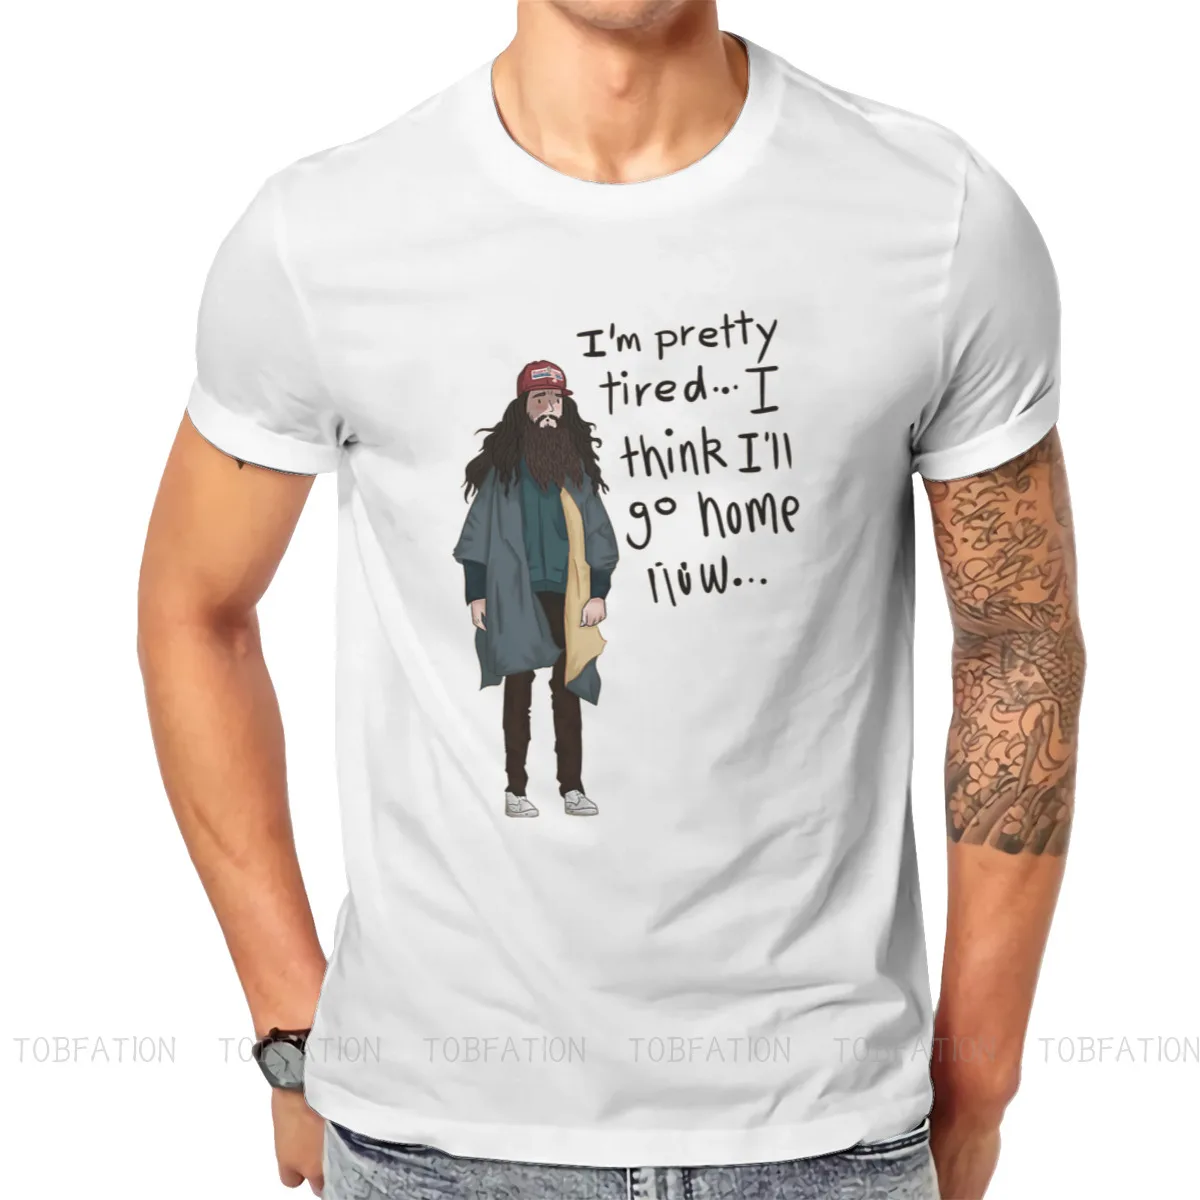 

I Think I'll Go Home Now Style TShirt Forrest Gump Romantic Comedy Drama Film Top Quality New Design Gift Idea T Shirt Stuff